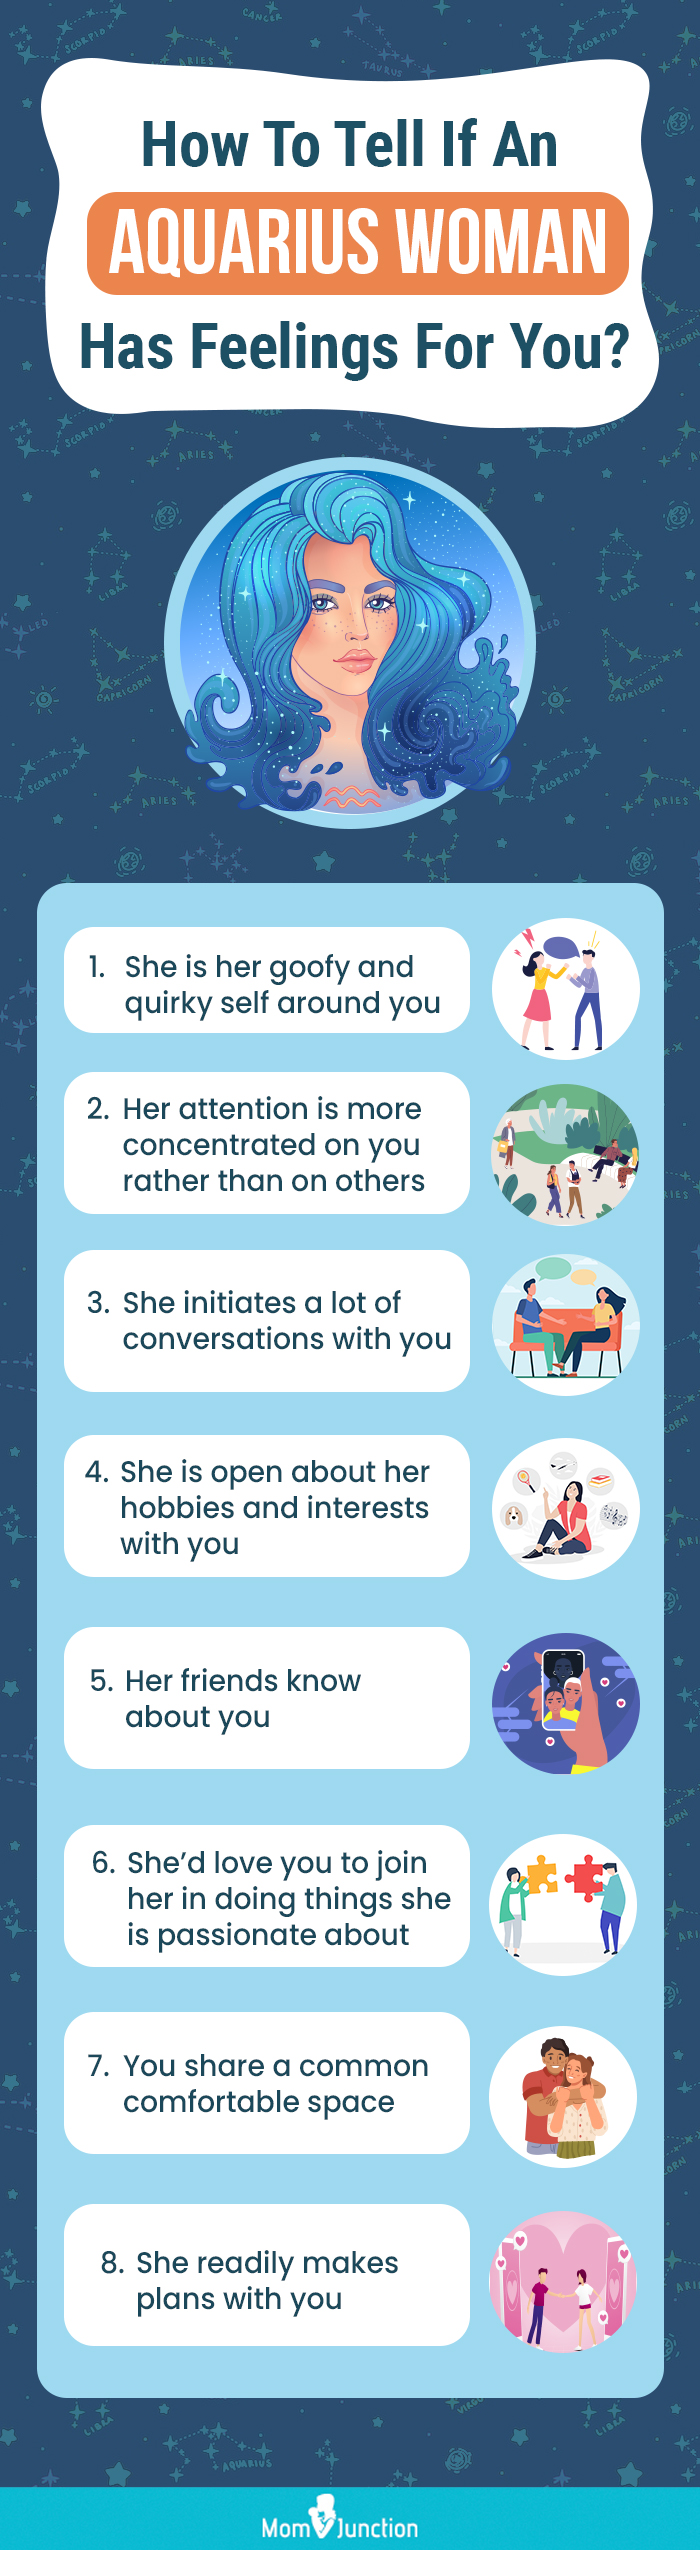 how to tell if an aquarius women has feelings for you (infographic)